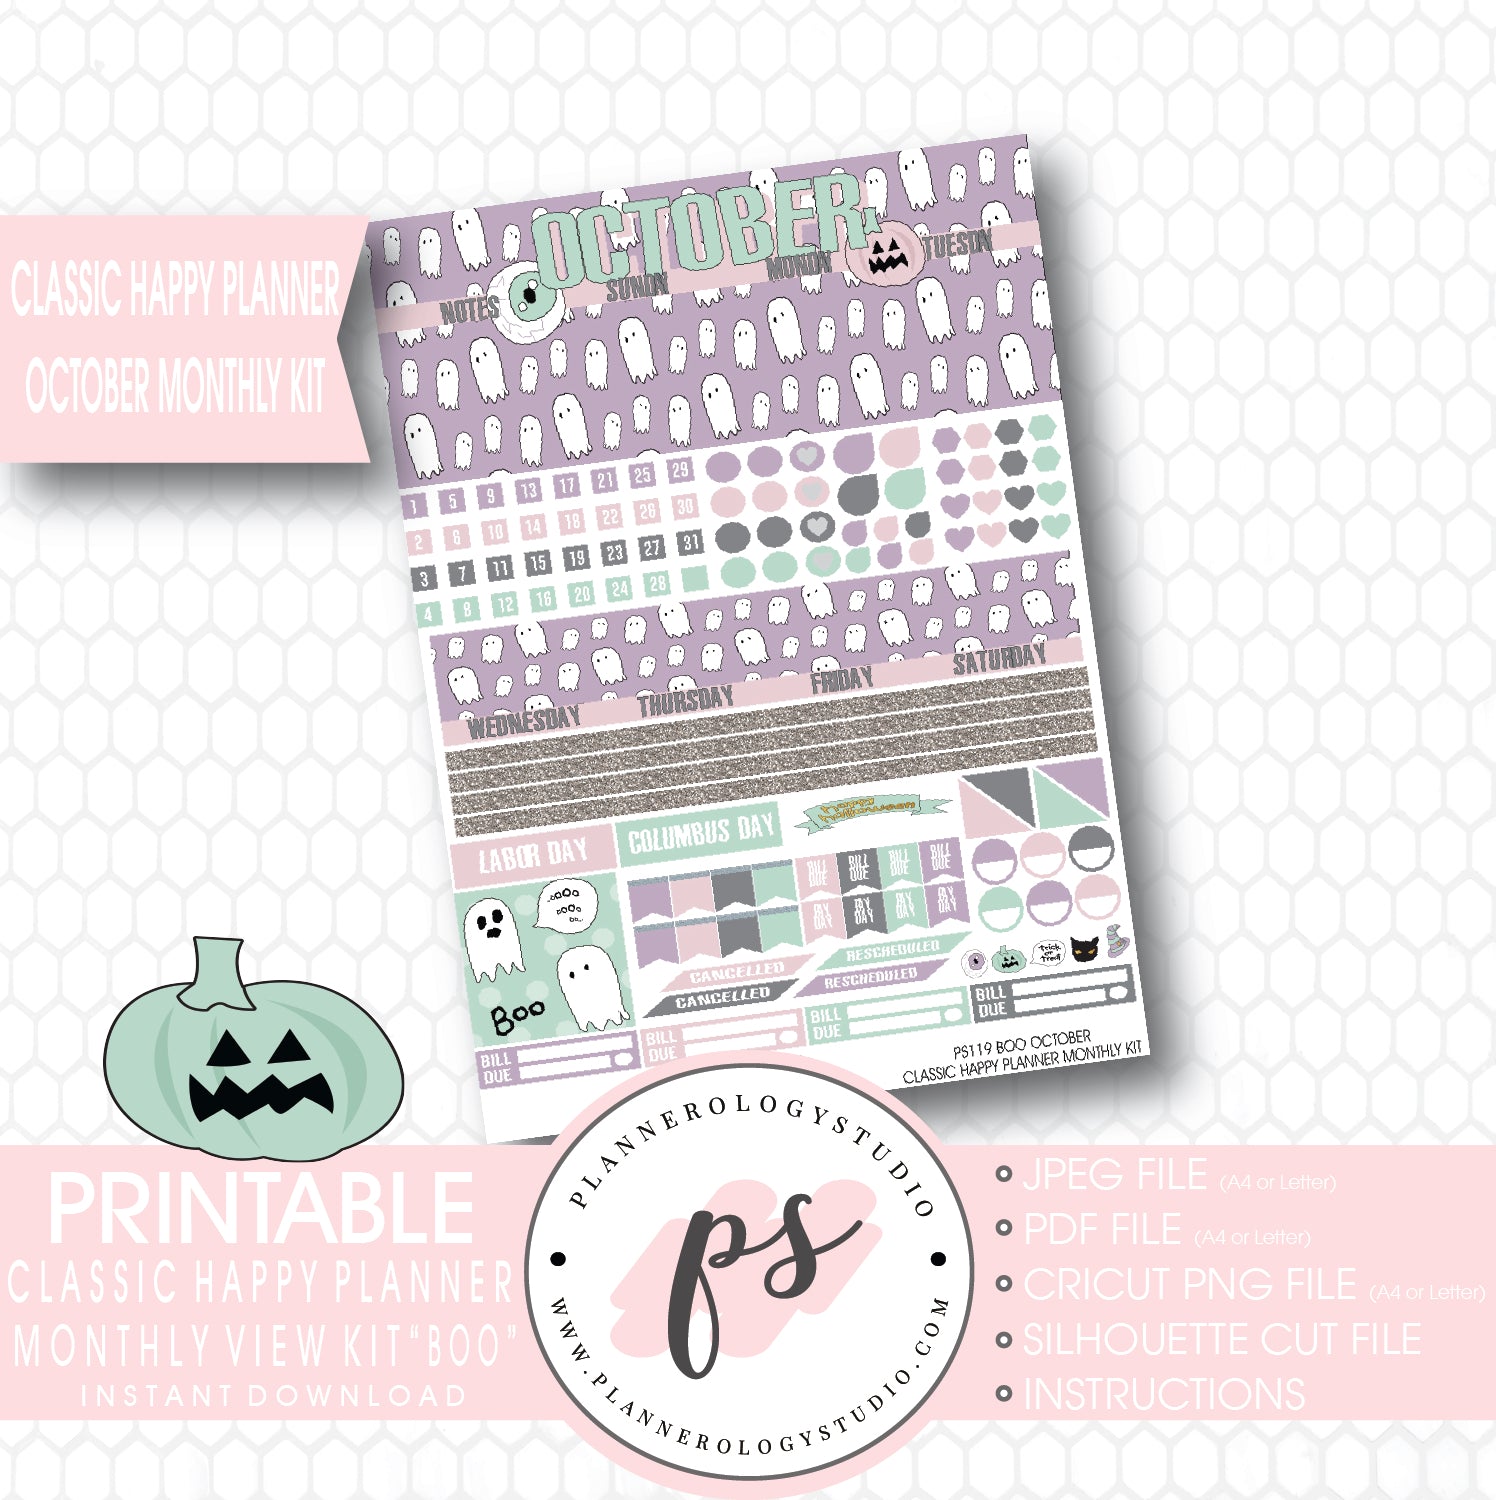 "Boo" October 2017 Halloween Monthly View Kit Printable Planner Stickers (for use with Mambi Classic Happy Planner) - Plannerologystudio